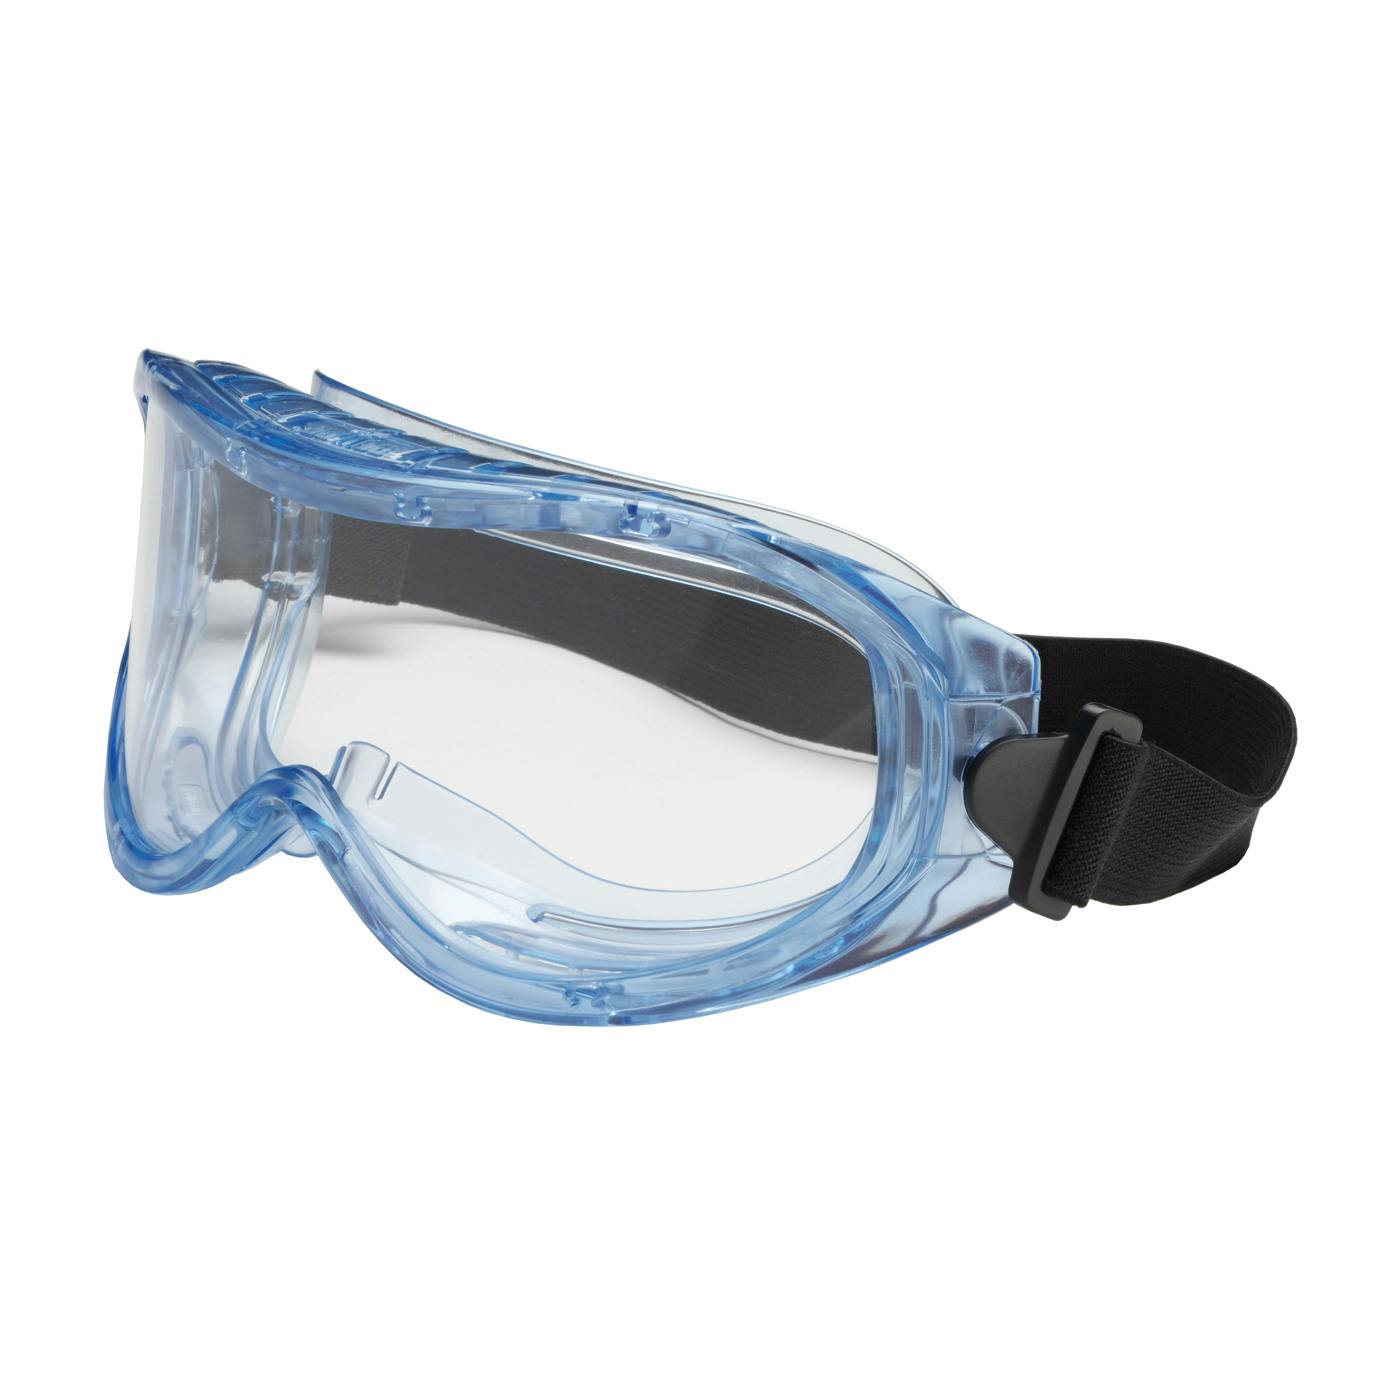 Indirect Vent Goggle with Light Blue Body, Clear Lens and Anti-Scratch / Anti-Fog Coating, Light Blue (251-5300-400) - OS_0